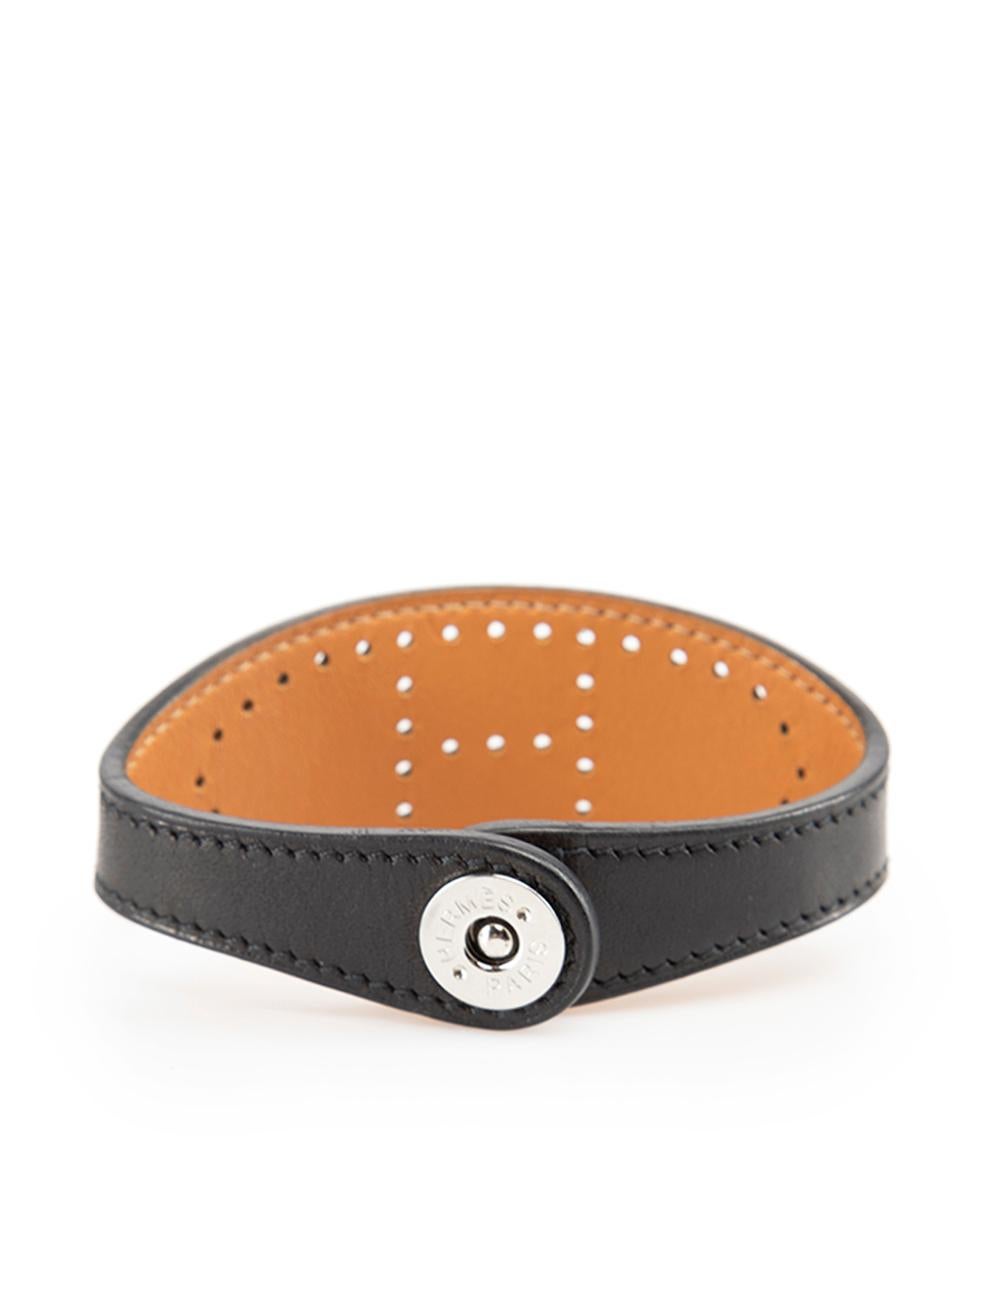 Hermès Black Leather Evelyne Perforated Bracelet In Excellent Condition For Sale In London, GB